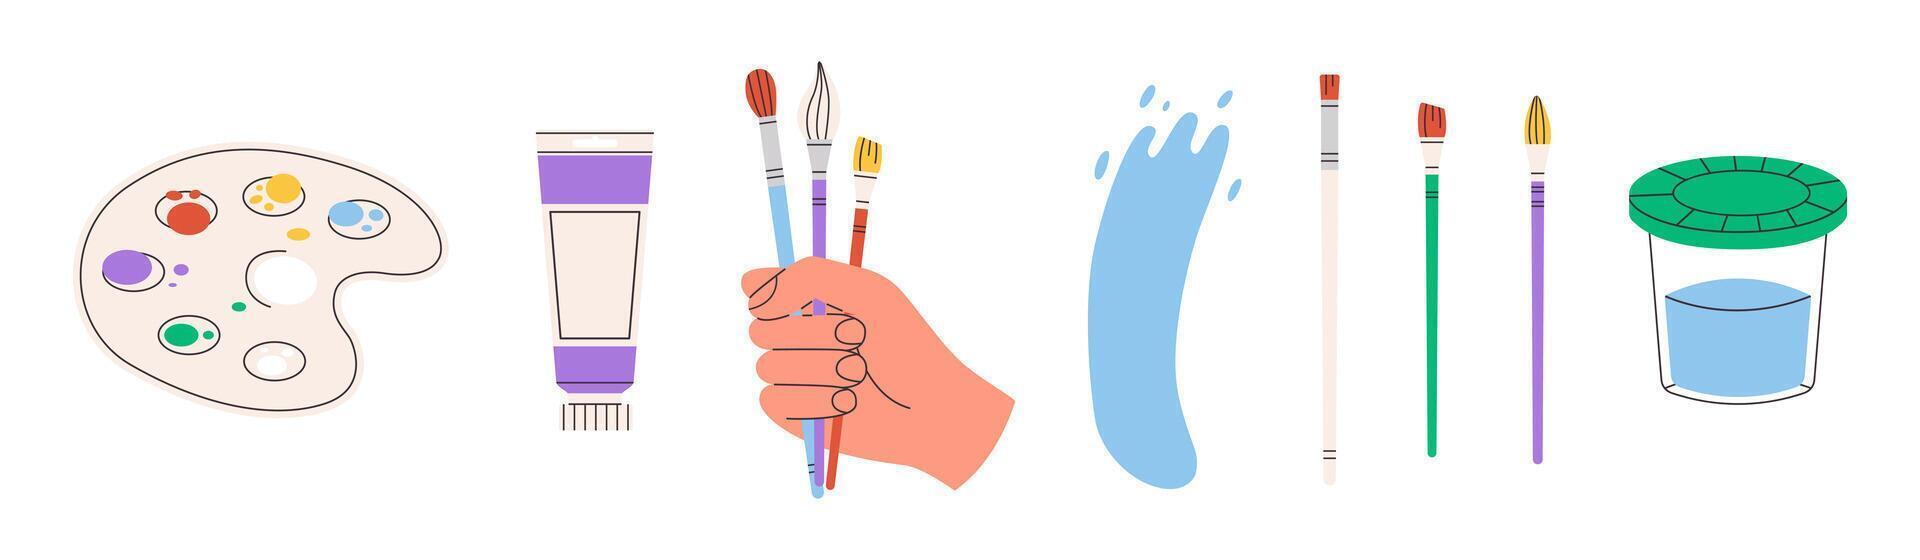 Painting tools elements set. Art supplies, paint tubes, brushes, watercolor, palette. Flat illustration isolated on white. Hand drawn style. vector